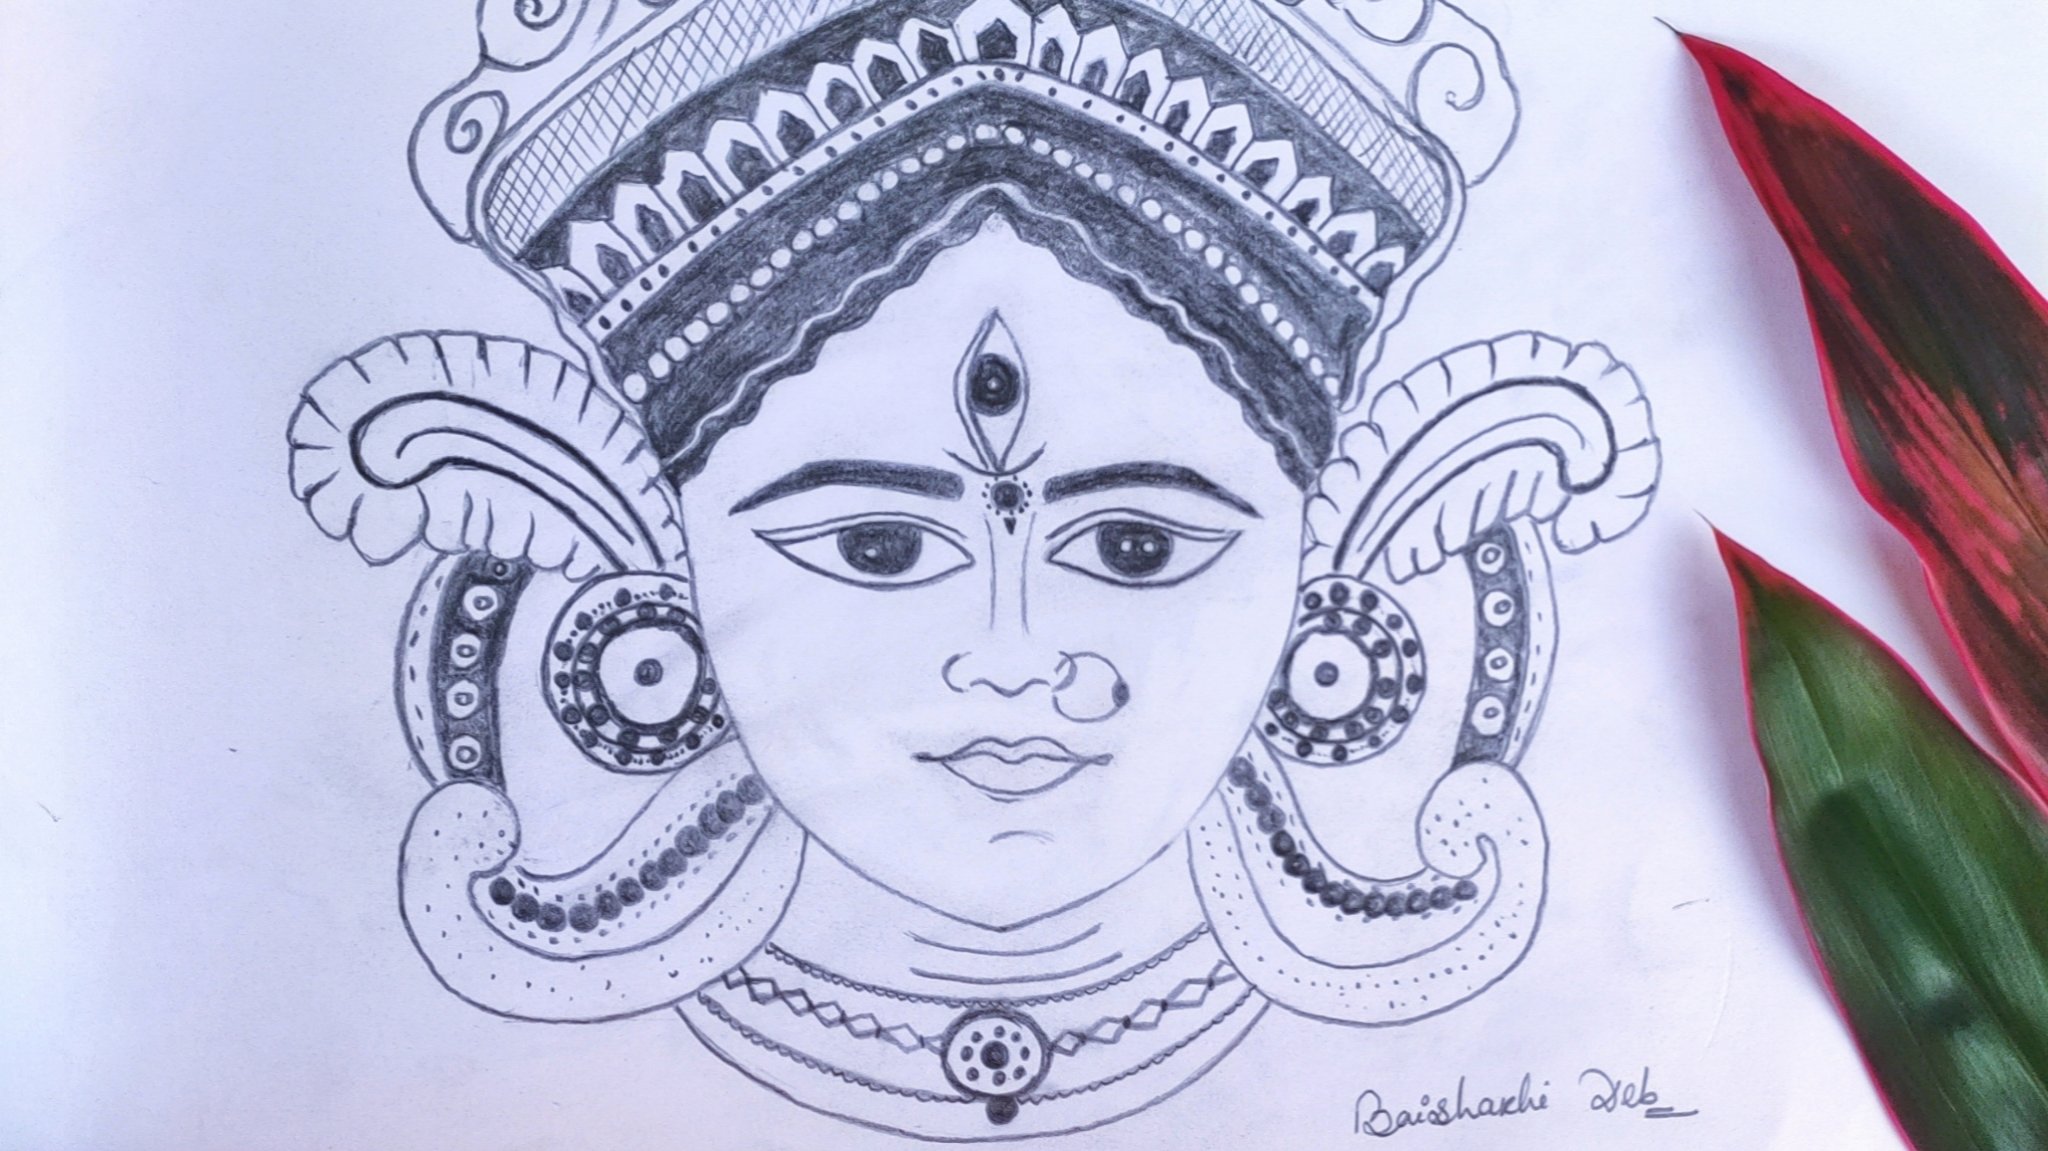 Drawing Durga Maa - Durga Puja From The Eyes Of A Child | Bookosmia -  Bookosmia :: India's #1 Publisher for kids, by kids